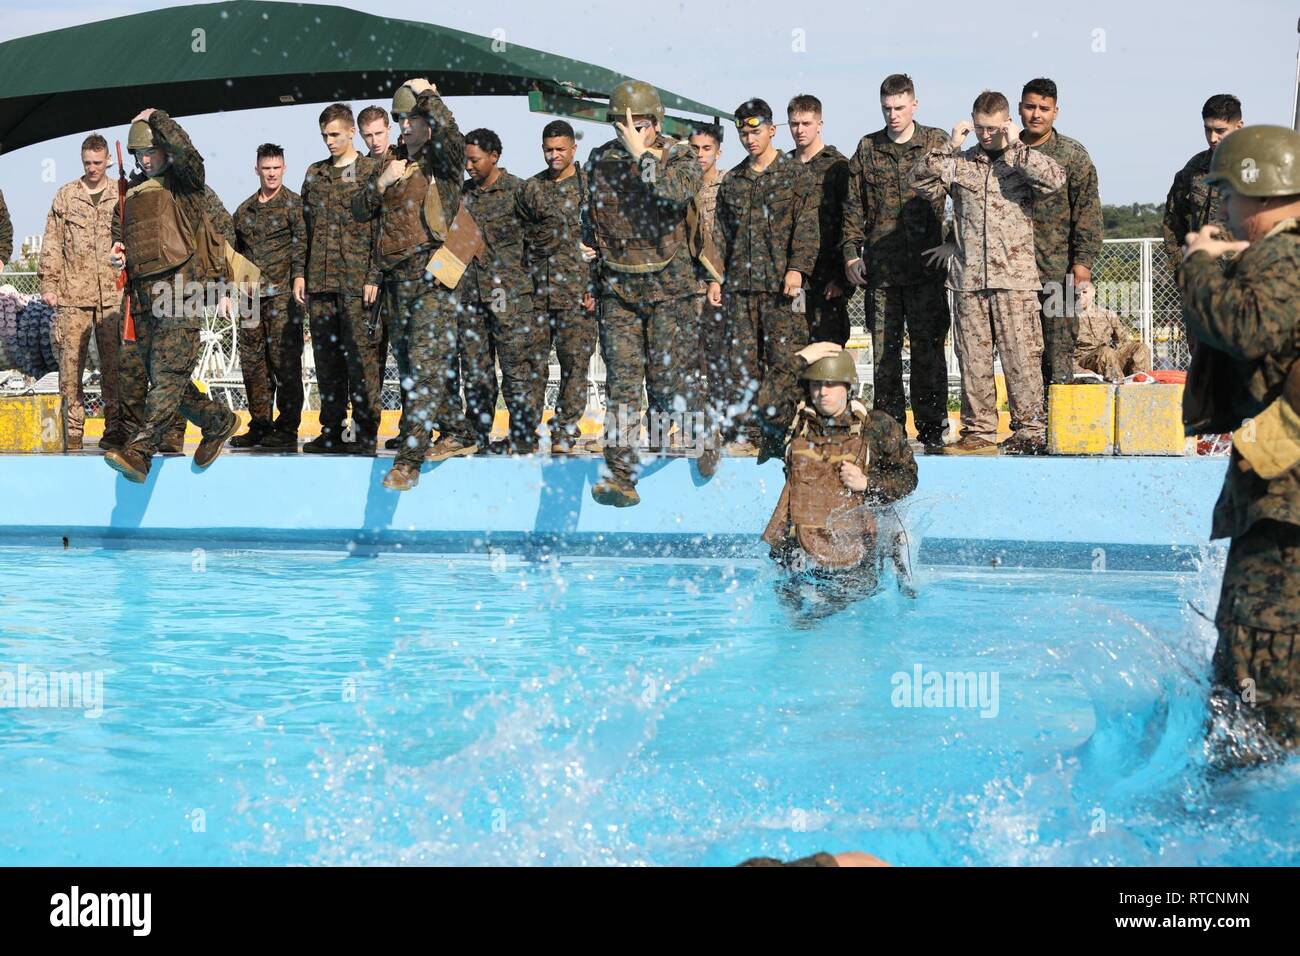 Marines jump into deep water and shed gear during an intermediate swim qualification on Camp Foster, Okinawa, Japan Feb. 14, 2019. Marines regularly complete their swim qualification to remain deployable and maintain overall unit readiness and fitness. Marines from 3rd Marine Logistics Group joined units from 3rd Marine Division and Marine Corps Installations Pacific to complete the training. Stock Photo